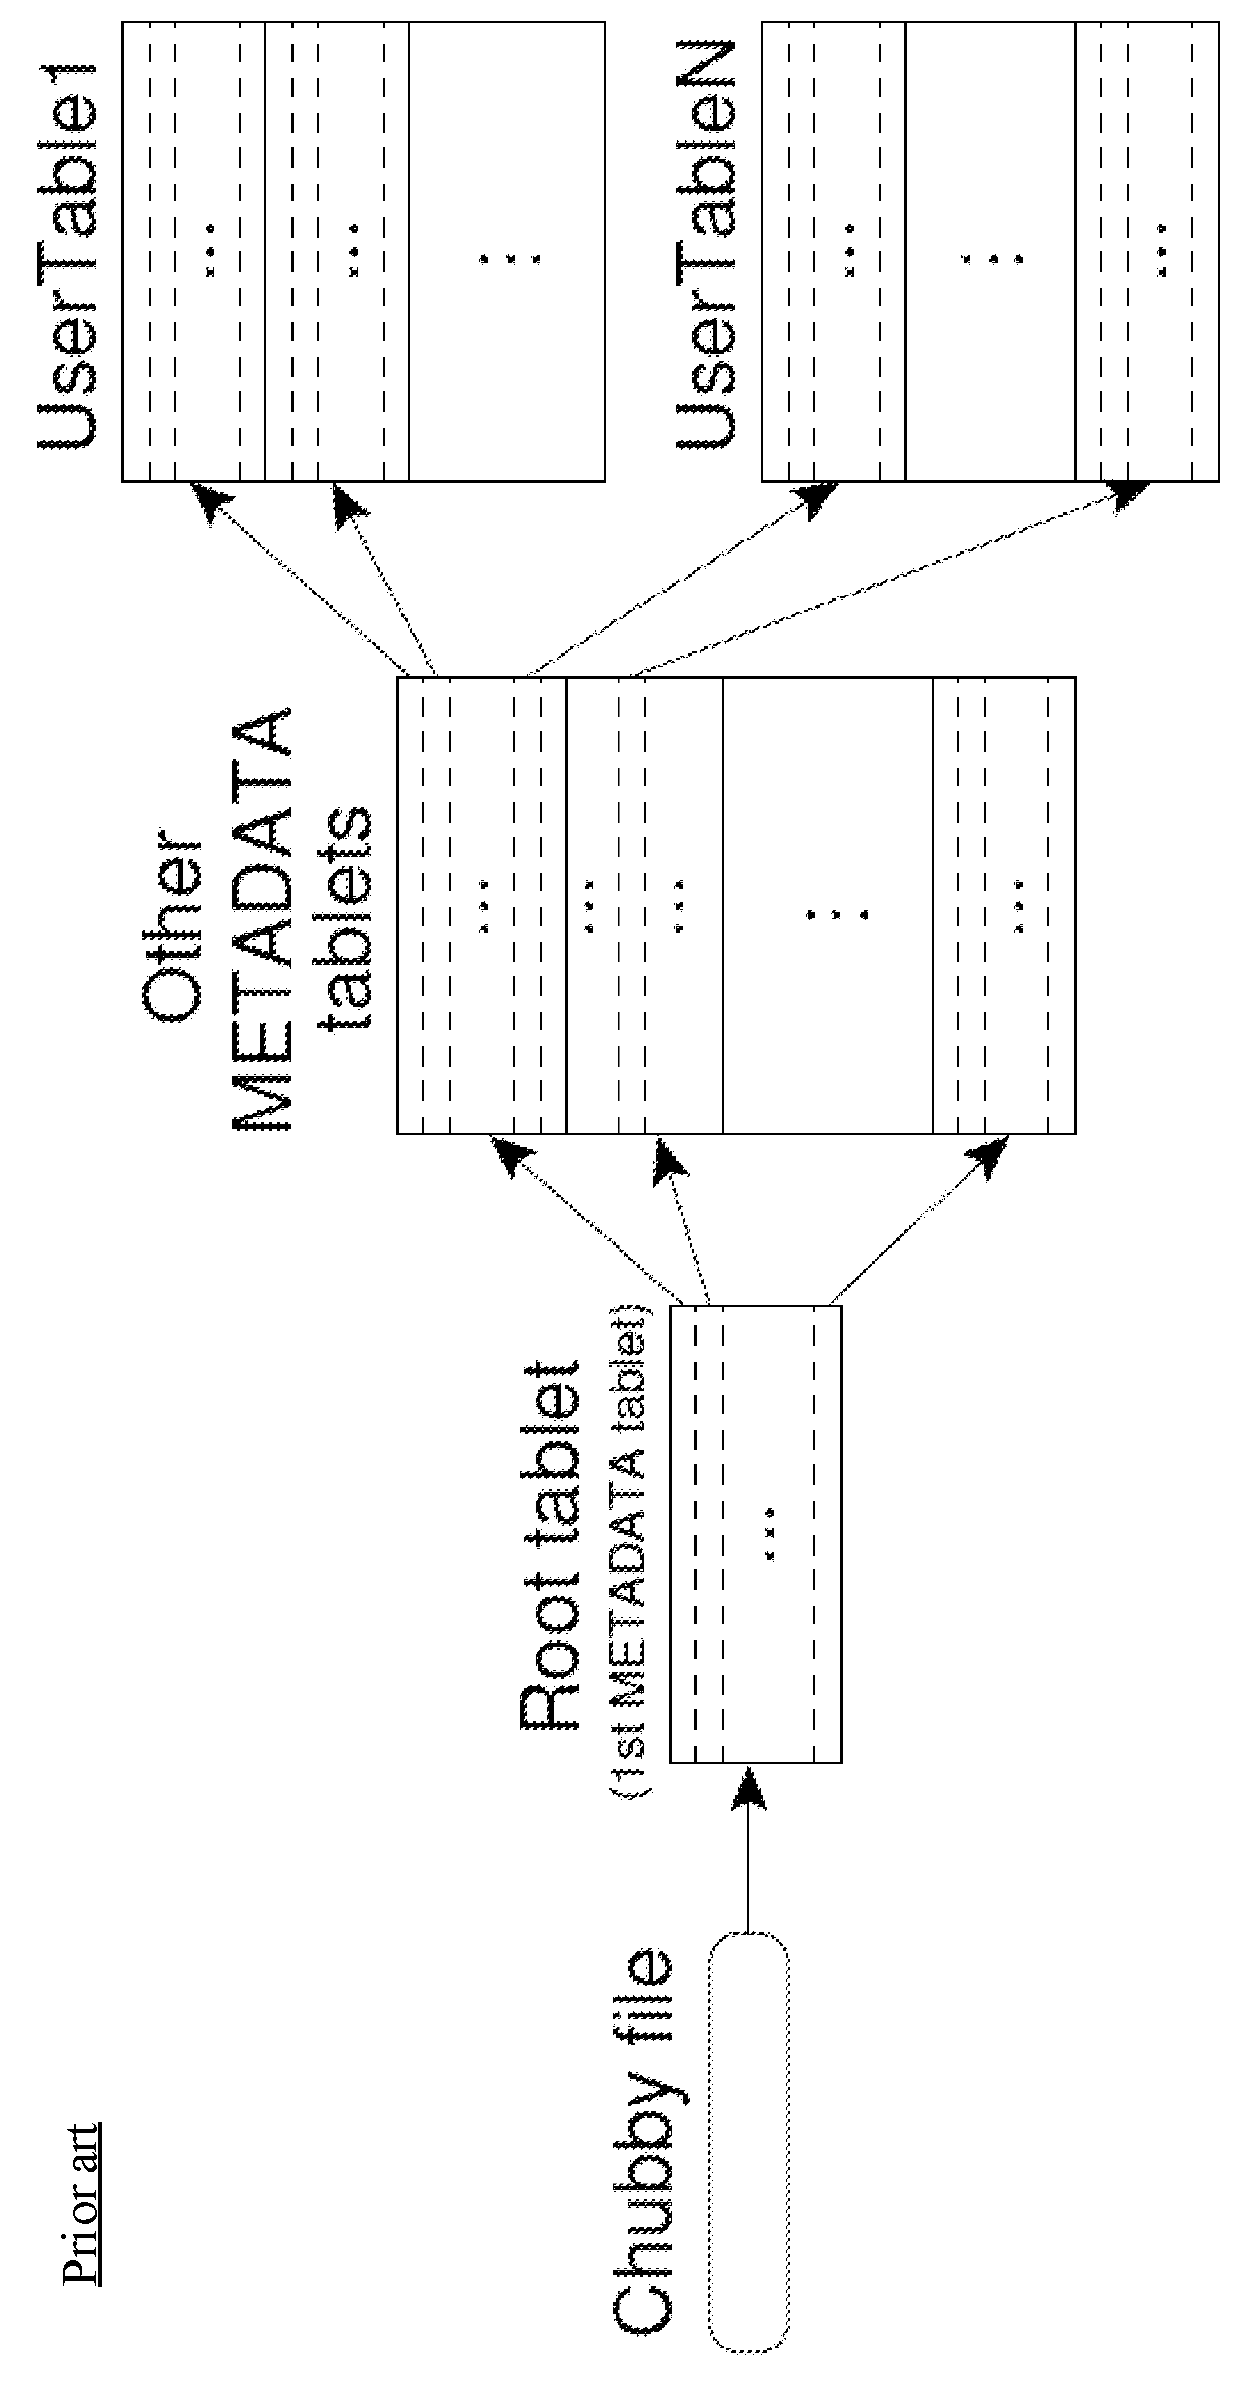 Data transition in highly parallel database management system